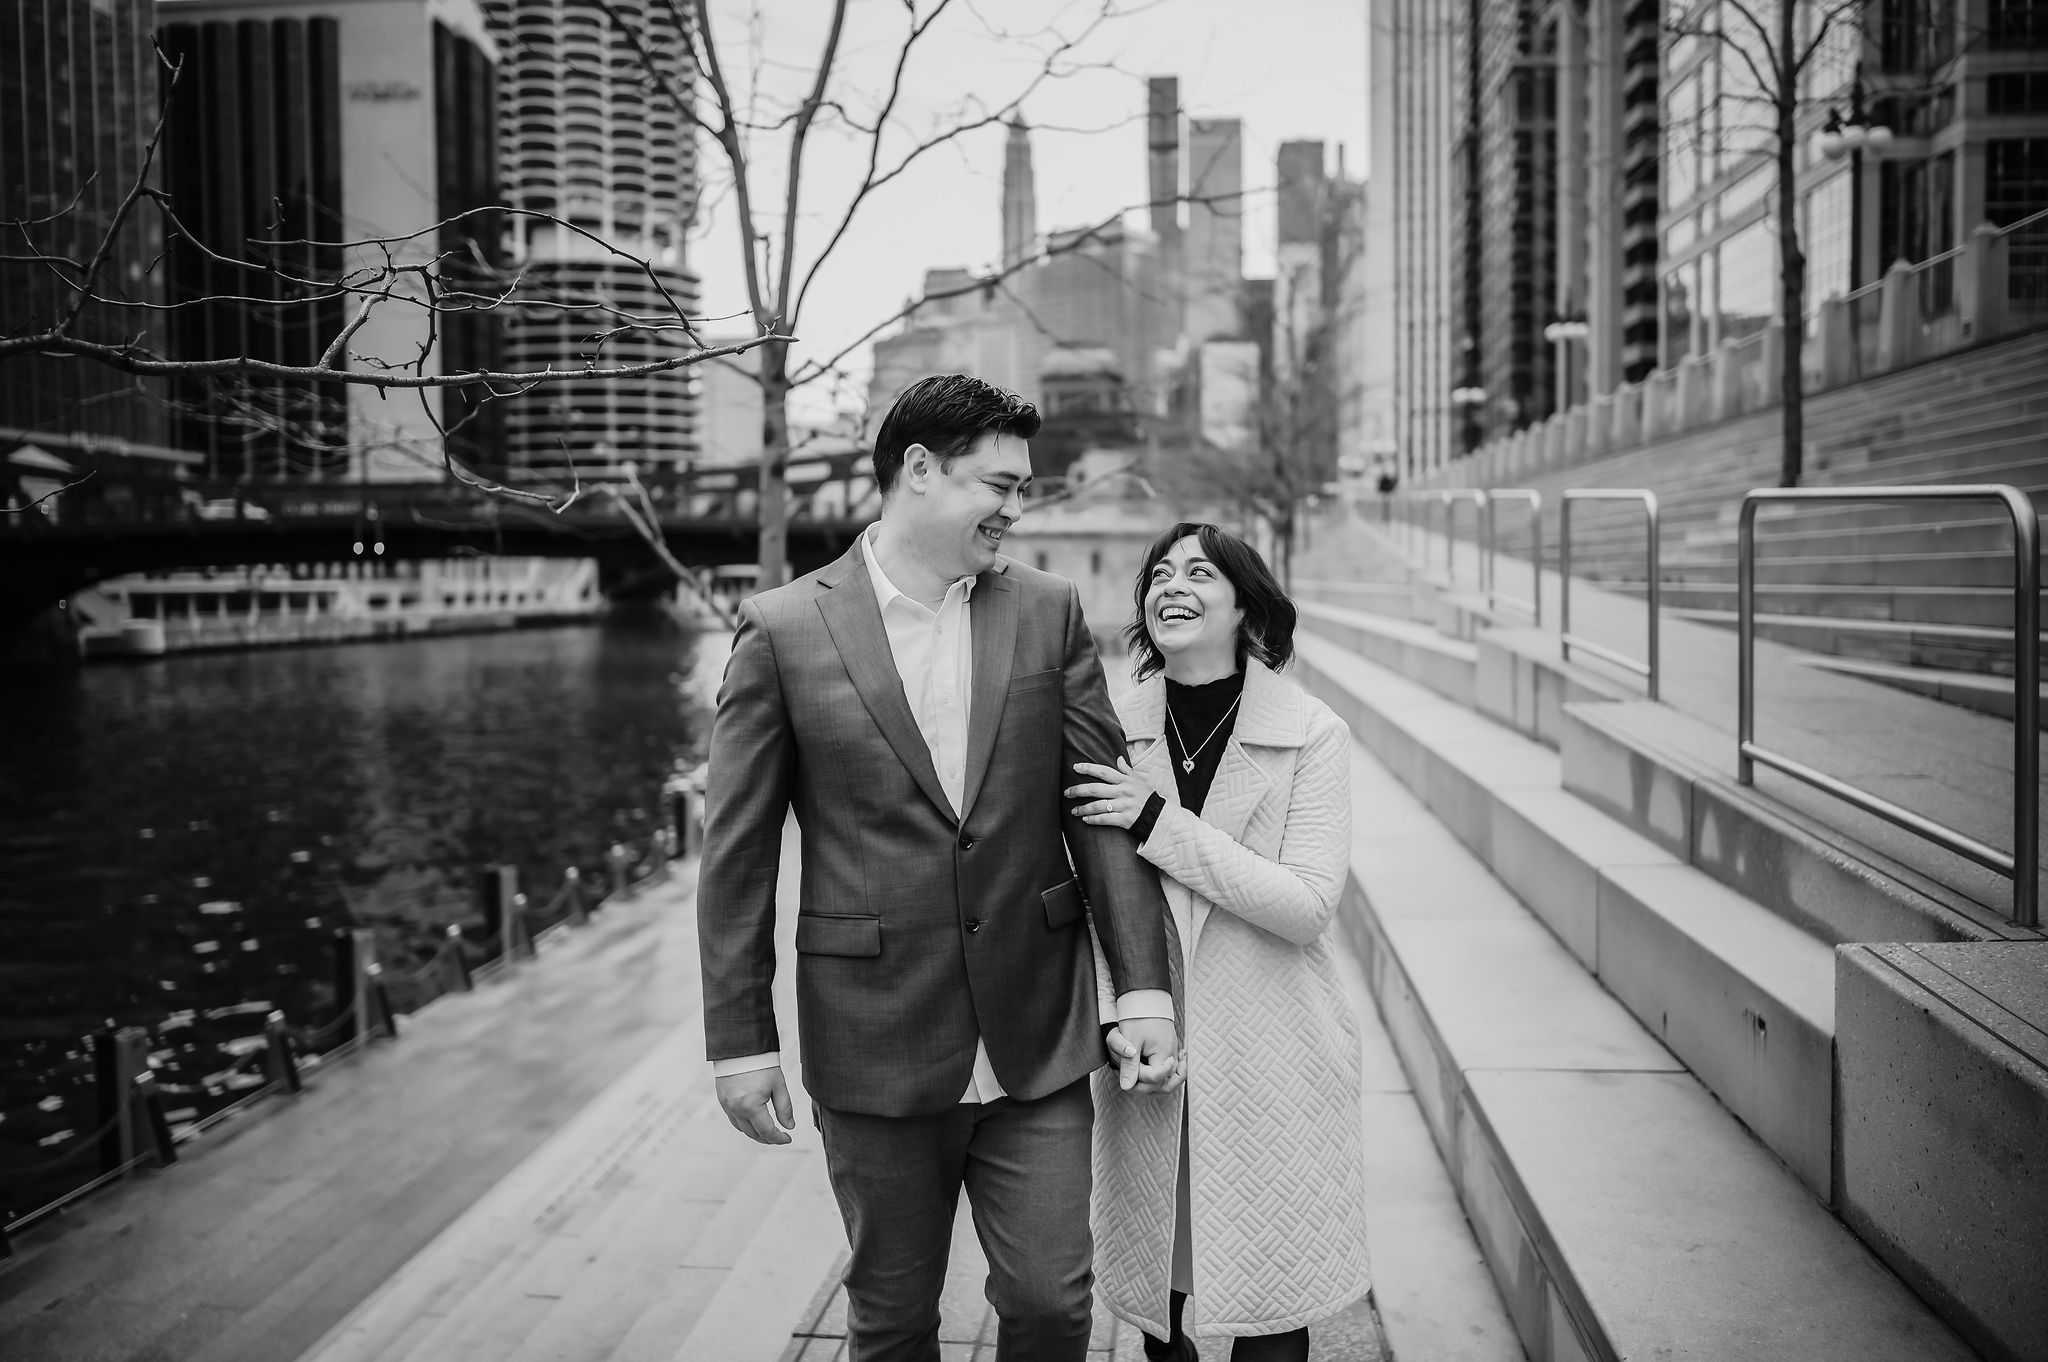 A man and women embrace on the Chicago Riverwalk.